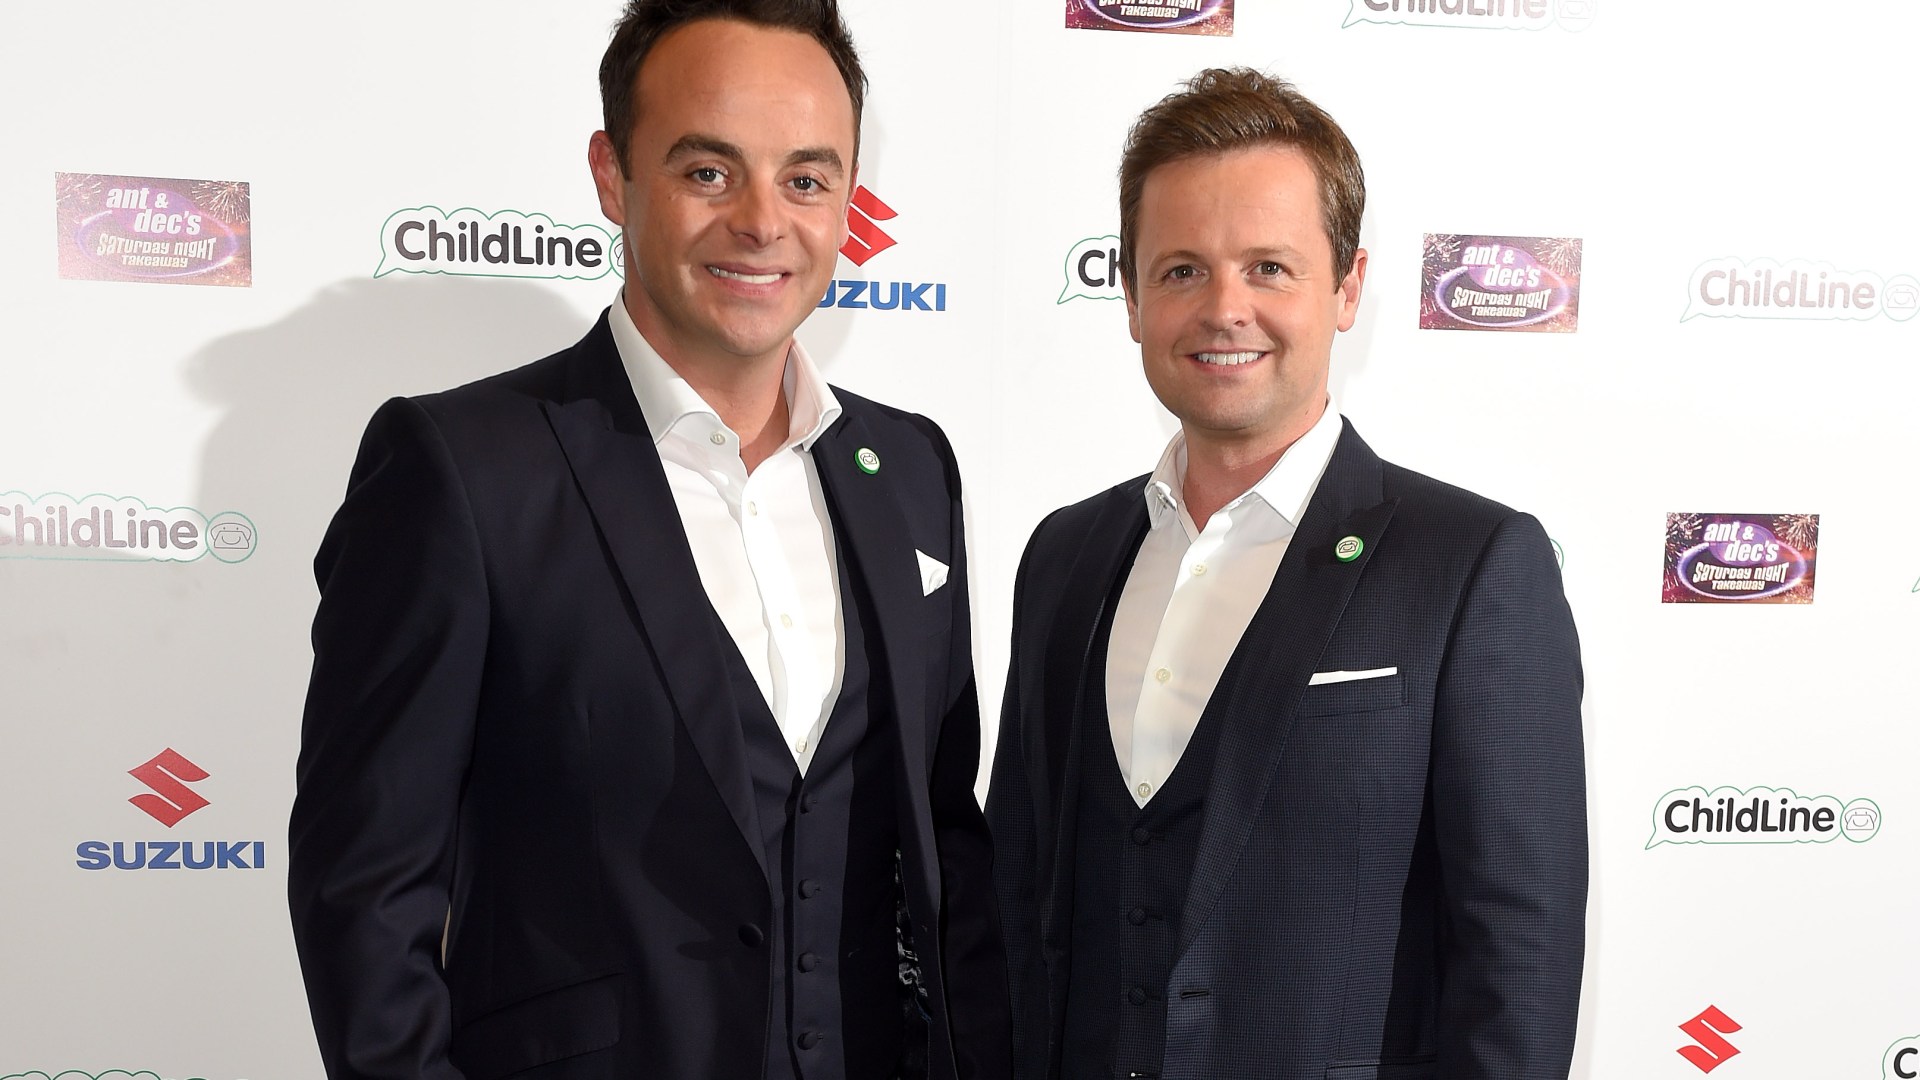 “Pop Megastar and Daytime TV Queen Join Ant & Dec’s Saturday Night Takeaway Lineup” – Exciting Celebrity Additions to Hit TV Show!